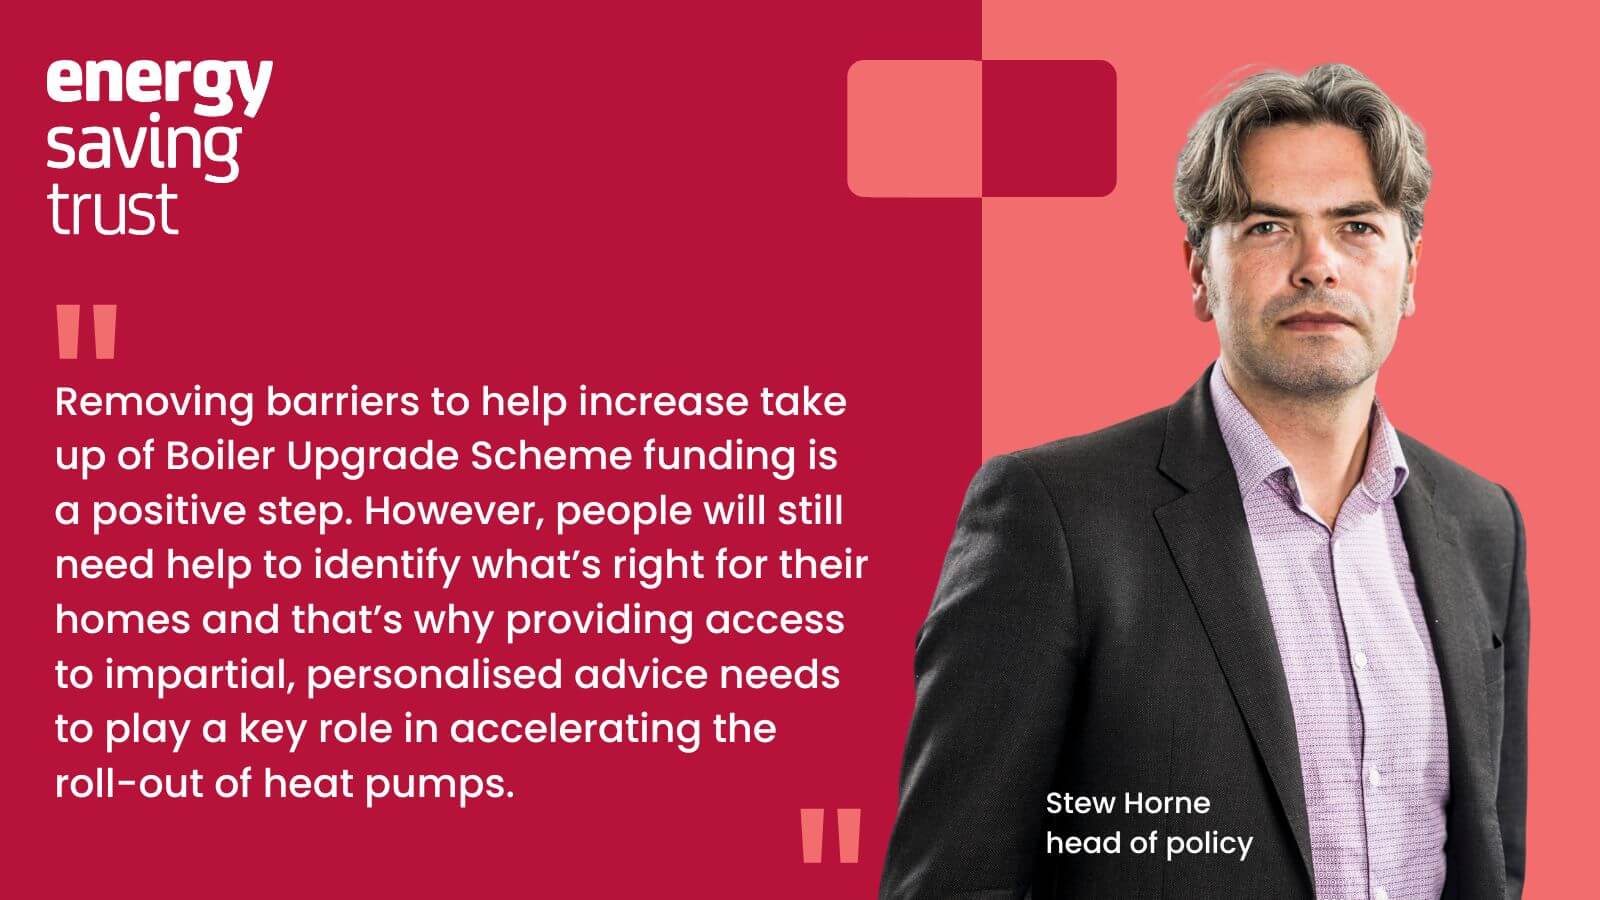 Stew Horn, Head of Policy at Energy Saving Trust, responds to the government